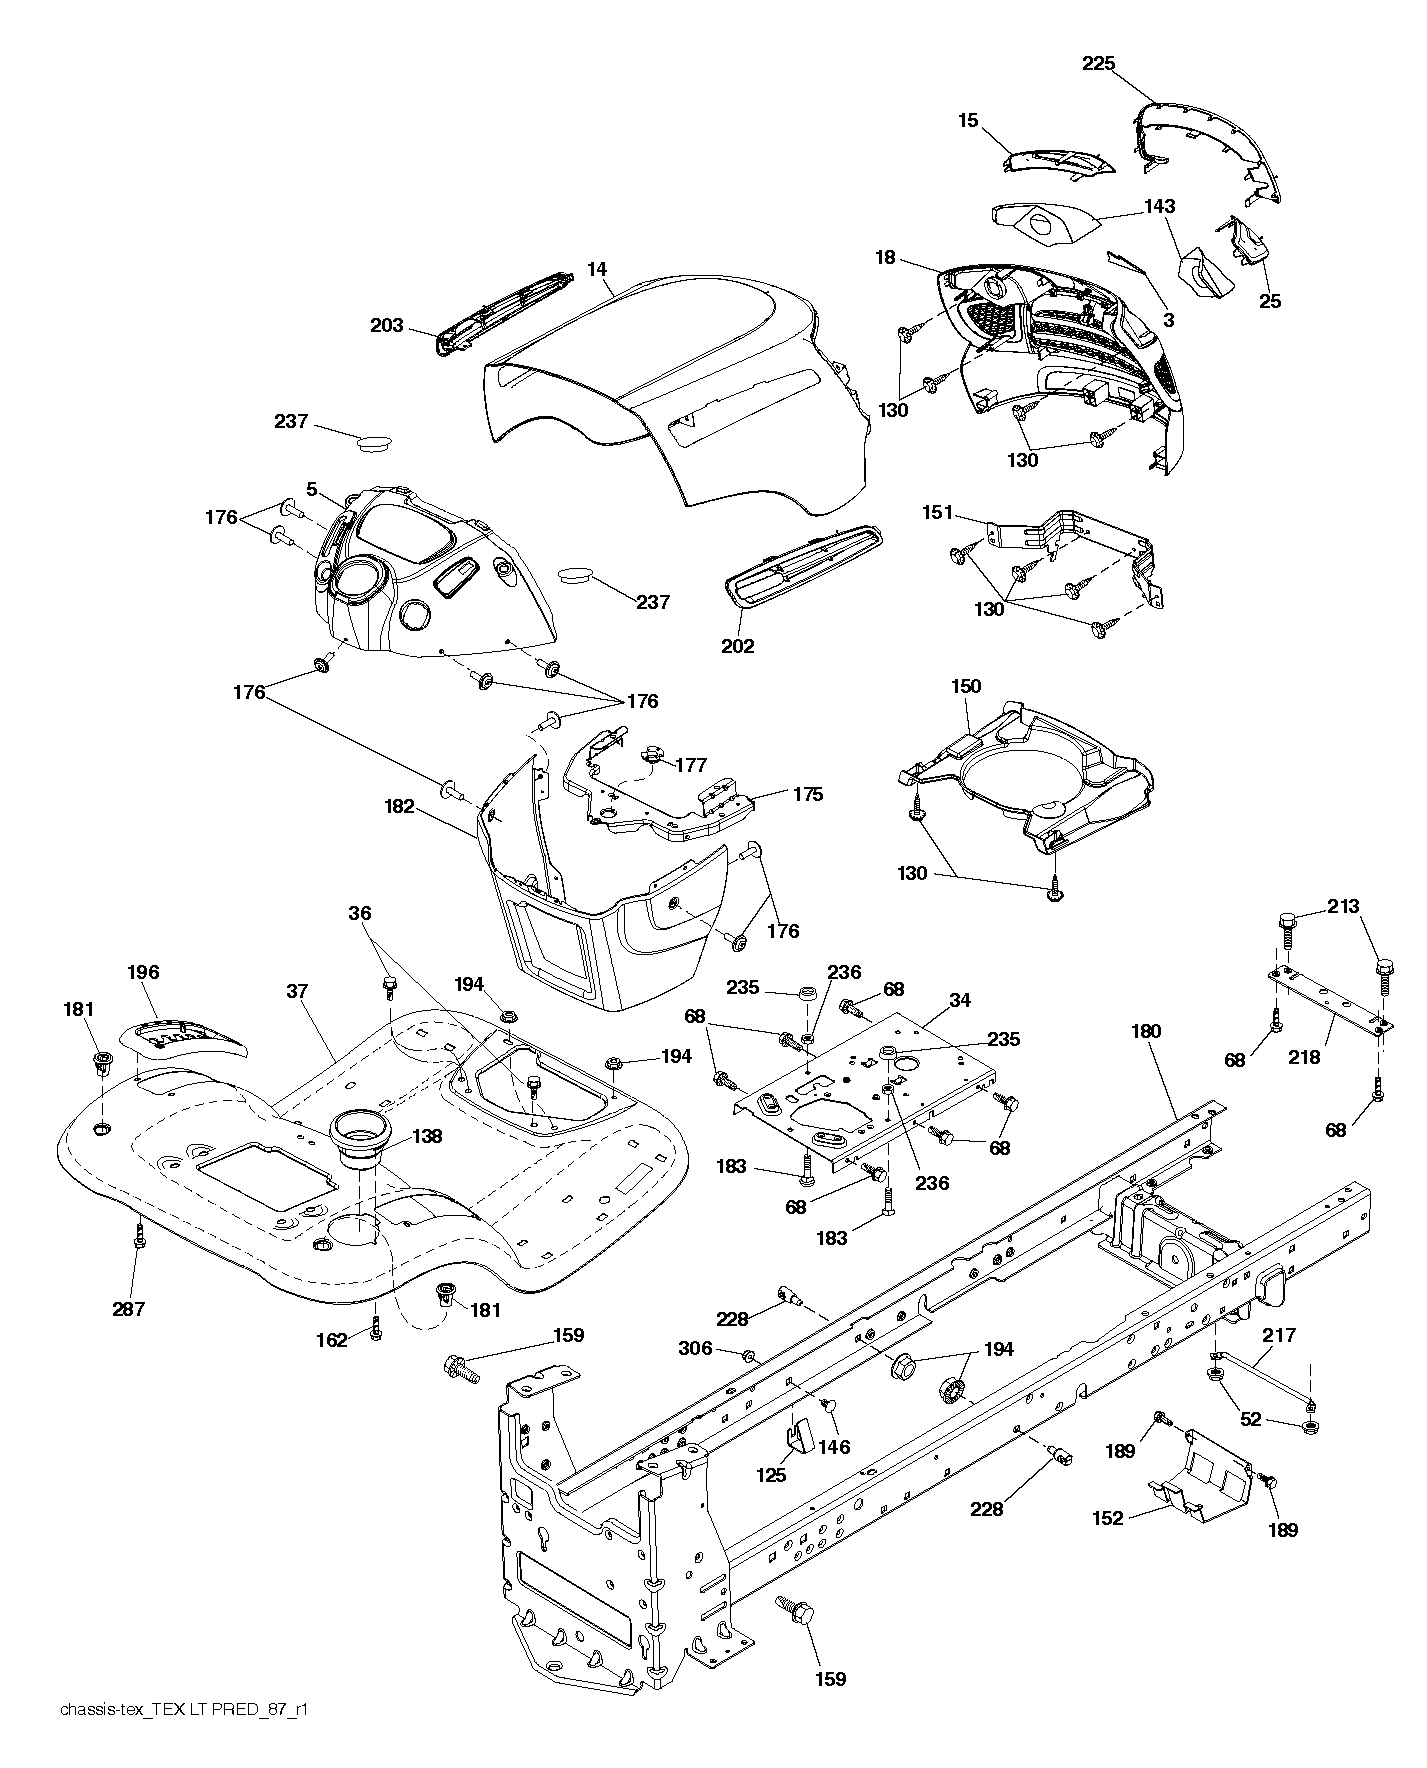 Chassis and appendix 578897101, 583745601, 587484601, 581055801, 581010701, 581055901, 580910801, 596030701, 532420796, 596040501, 596030701, 581684801, 596321701, 532409730, 581056002, 581857901, 532400267, 532187568, 531169901, 817000612, 532142432, 532199472, 532400776, 532195228, 532195457, 532404796, 532407176, 874520520, 532428867, 583612701, 532414581, 581564901, 581564801, 596030501, 532409167, 532196395, 581056201, 593824001, 532406129, 873930500, 532403704, 817600406, 532409149